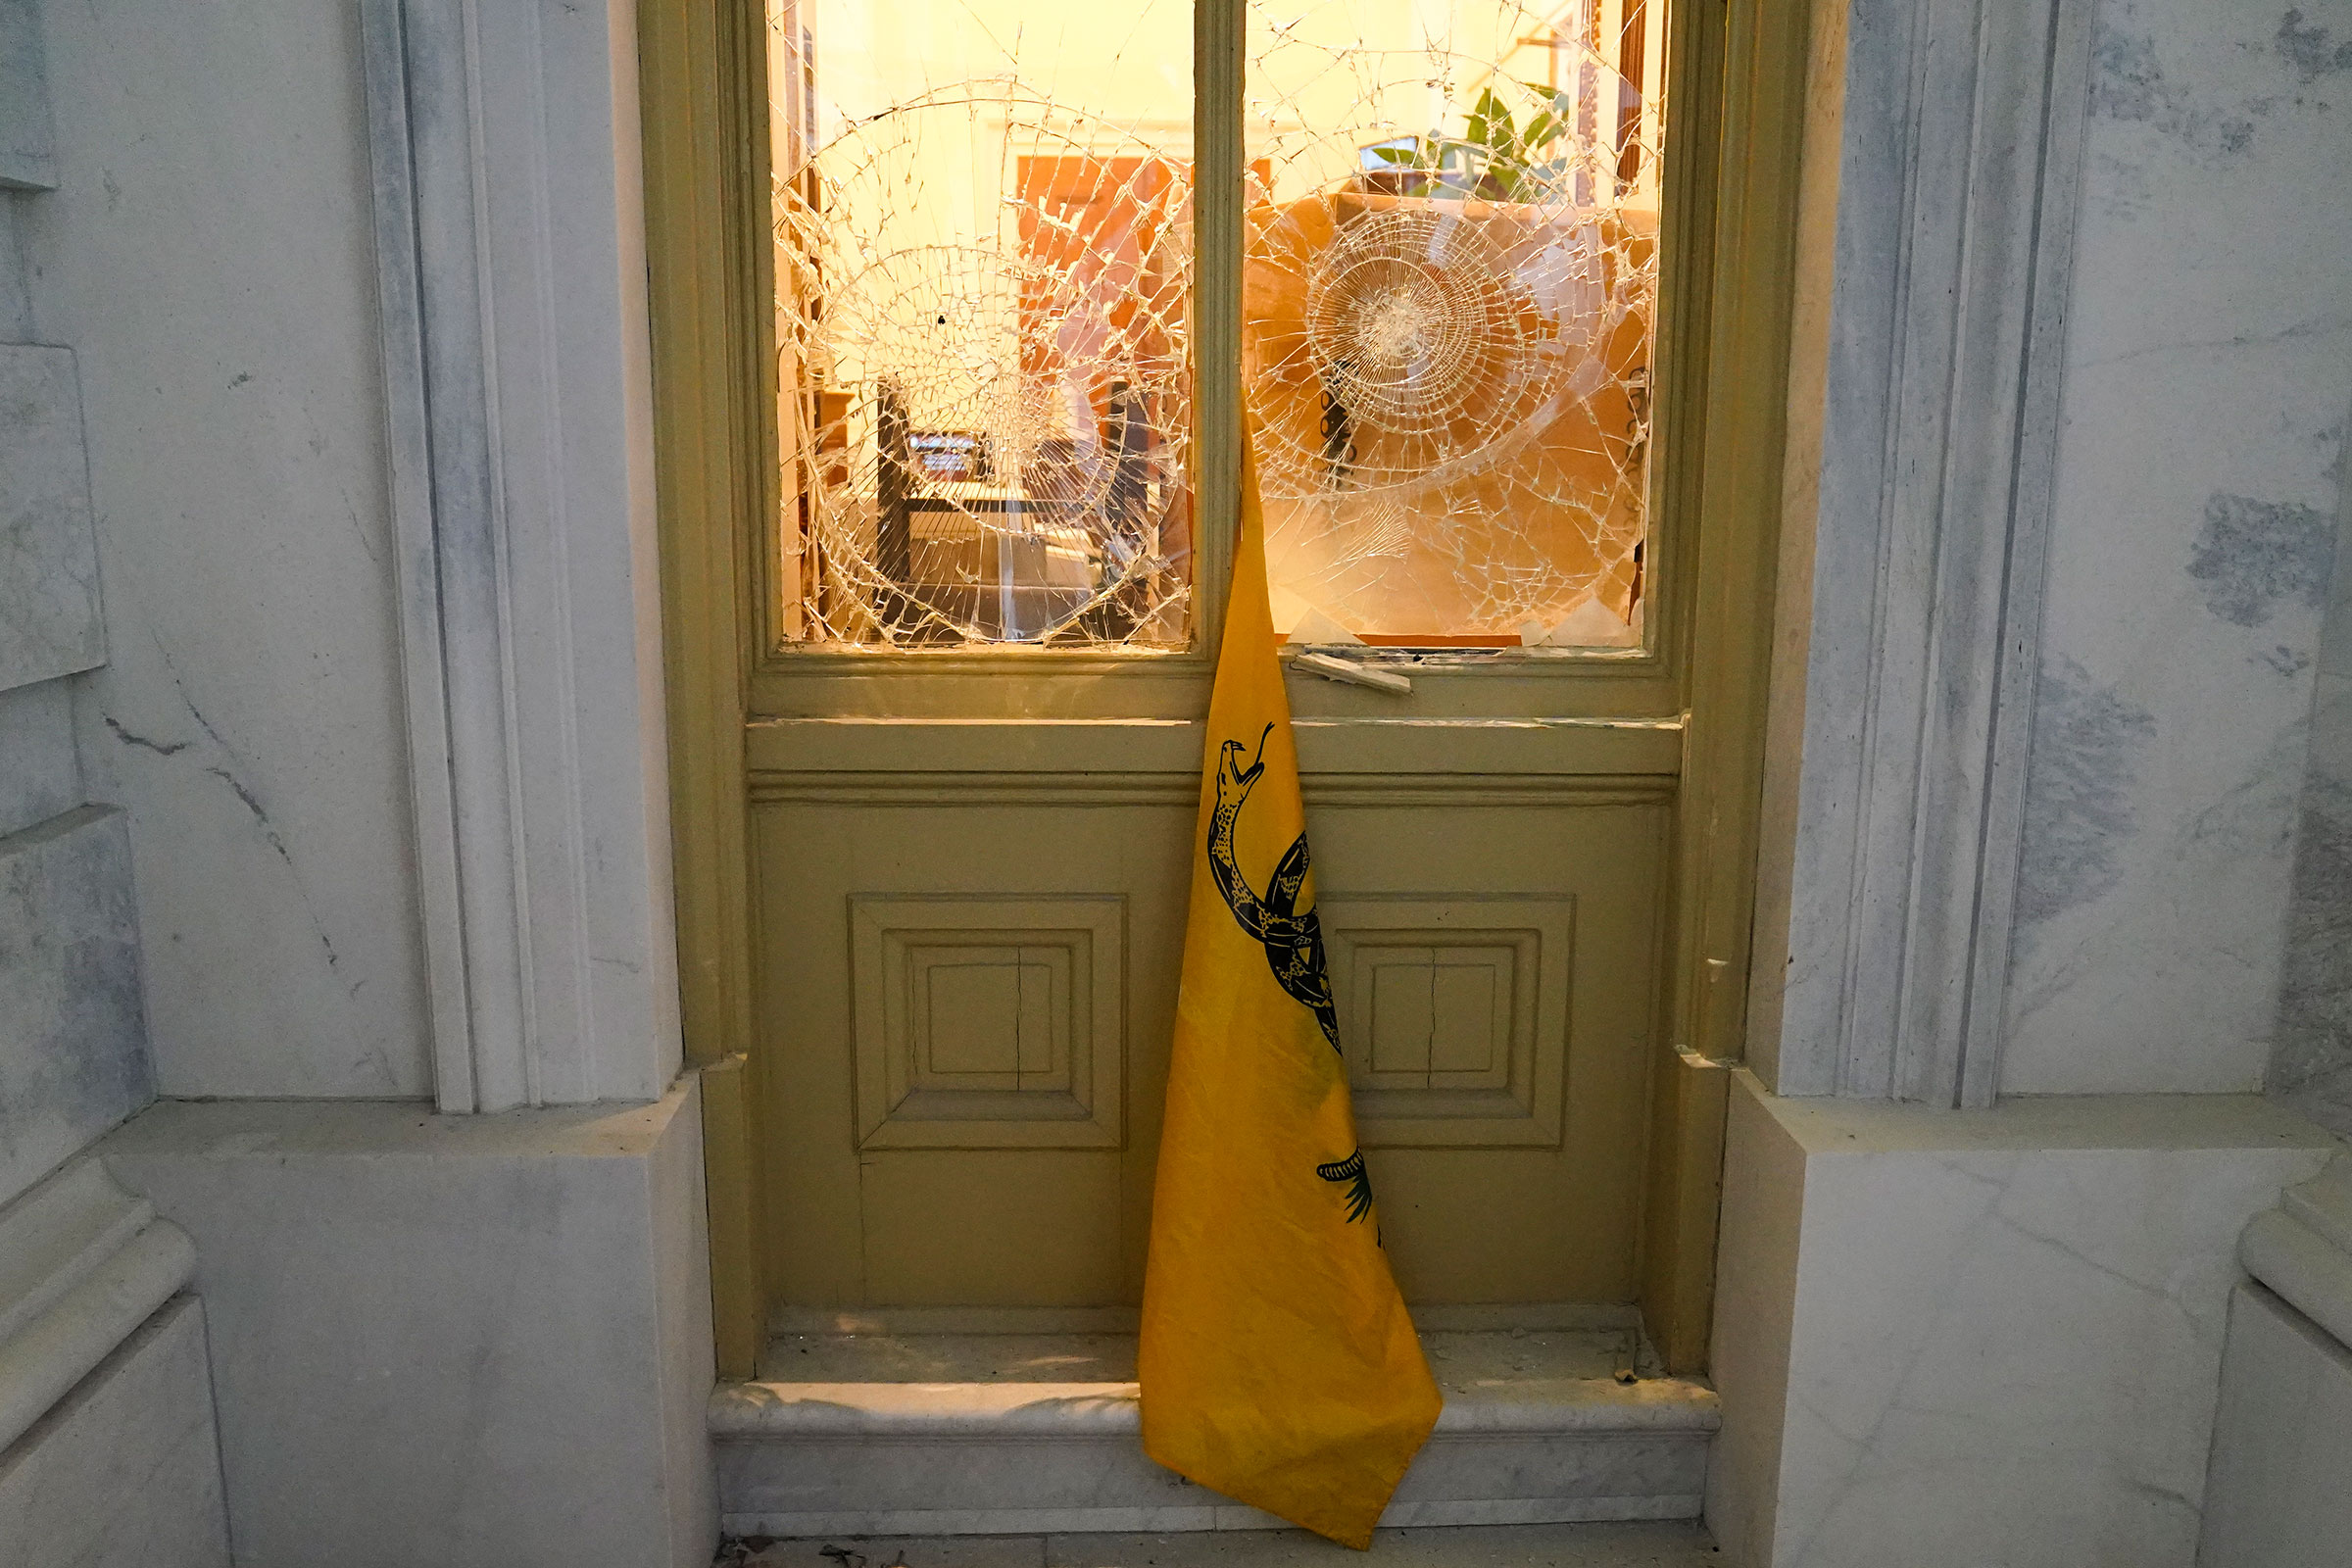 A flag hangs between broken windows after supporters of President Donald Trump tried to brake through police barriers outside the Capitol on Jan 6, 2021.